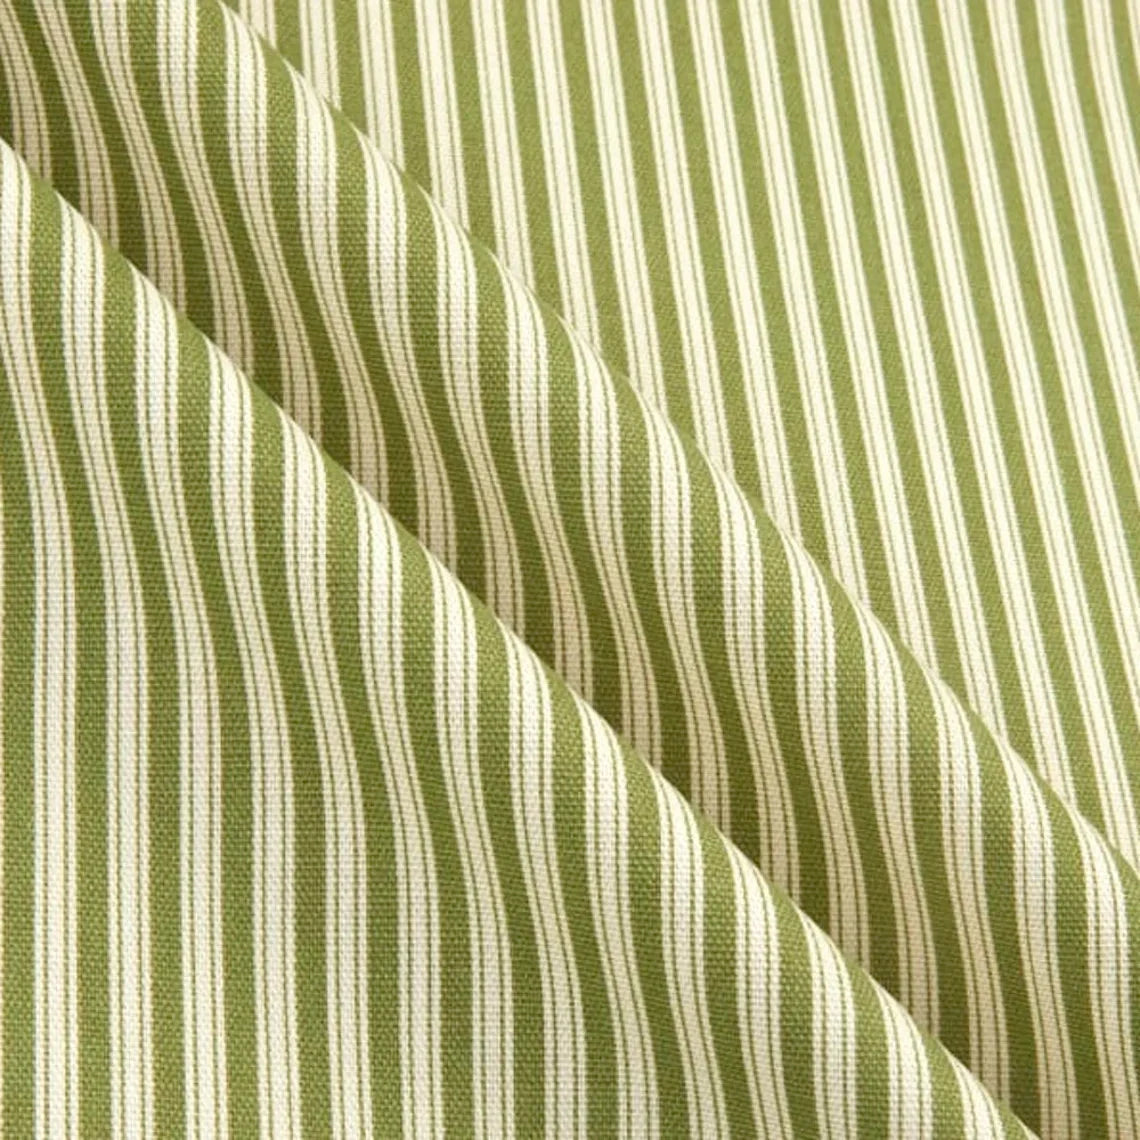 gathered bedskirt in polo jungle green stripe on cream